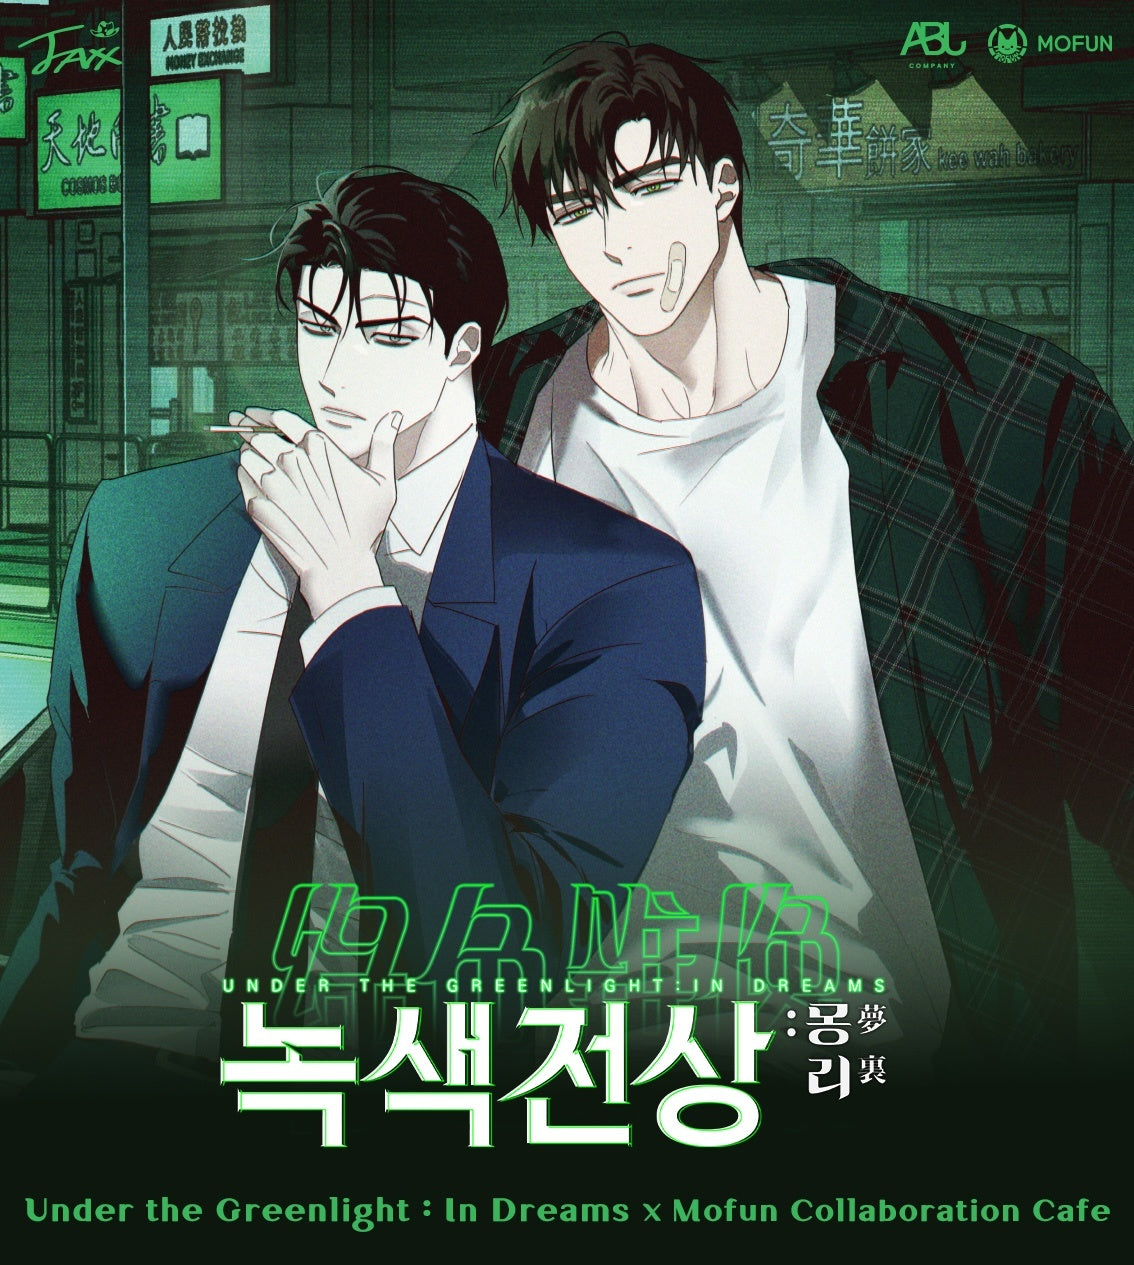 [collaboration cafe] Under the Greenlight : The S set